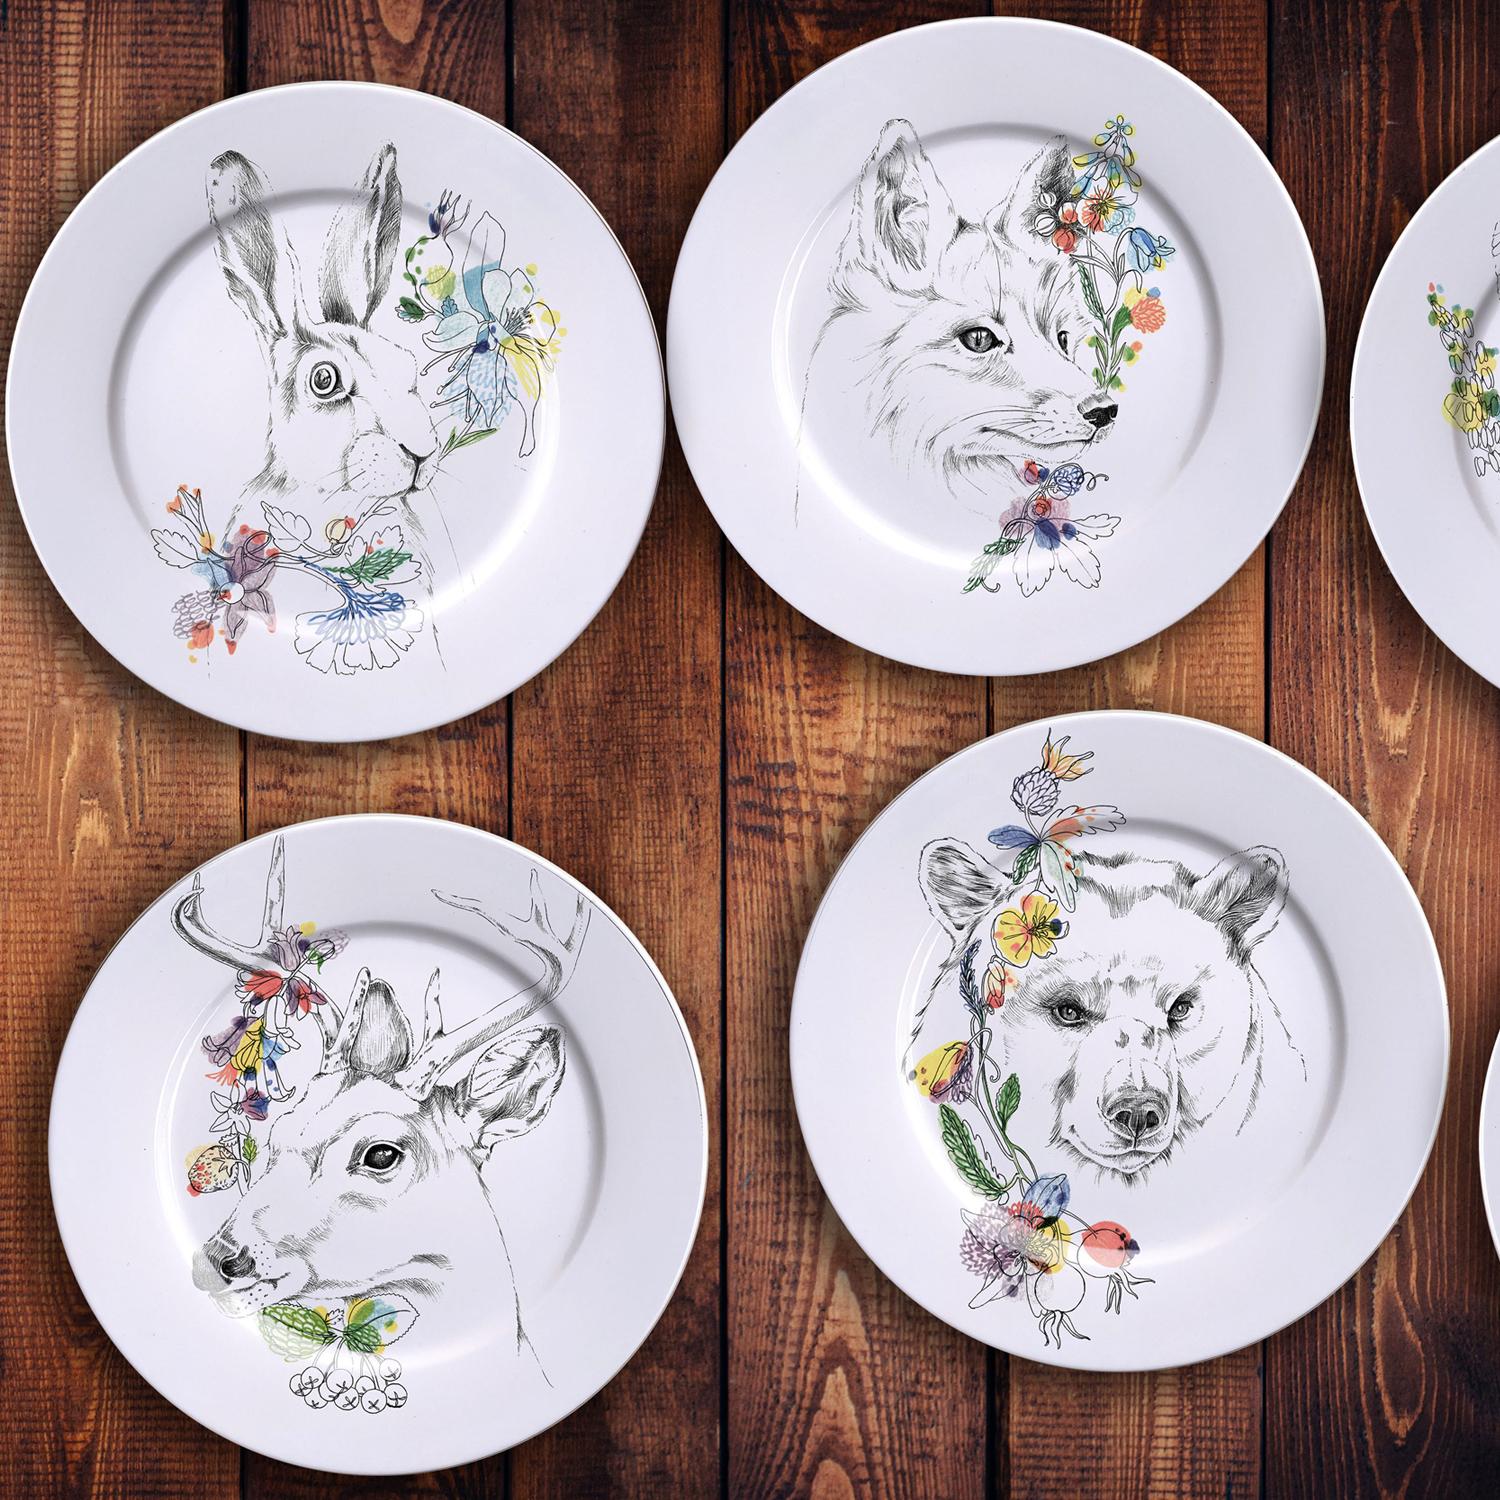 The typical animals of the American woods are gently painted on these dinner plates, with soft black tones and they are surrounded by a delicate and intriguing mix of wild flowers and leaves reinterpreted in a fresh and poetic color way. These